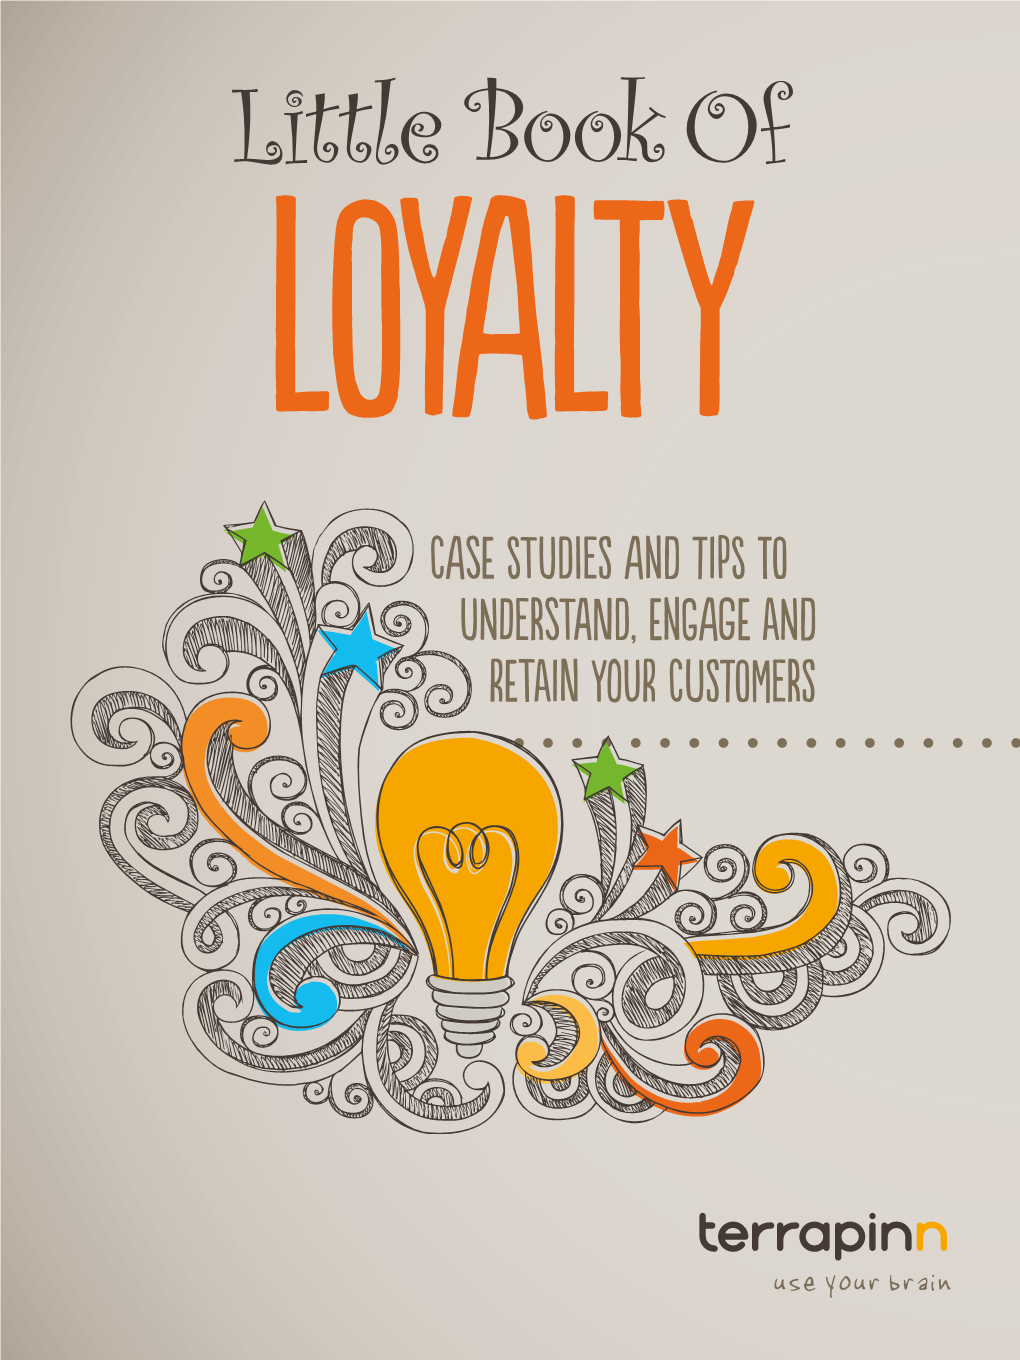 Little Book of Loyalty Case Studies and Tips to Understand, Engage and Retain Your Customers Introduction